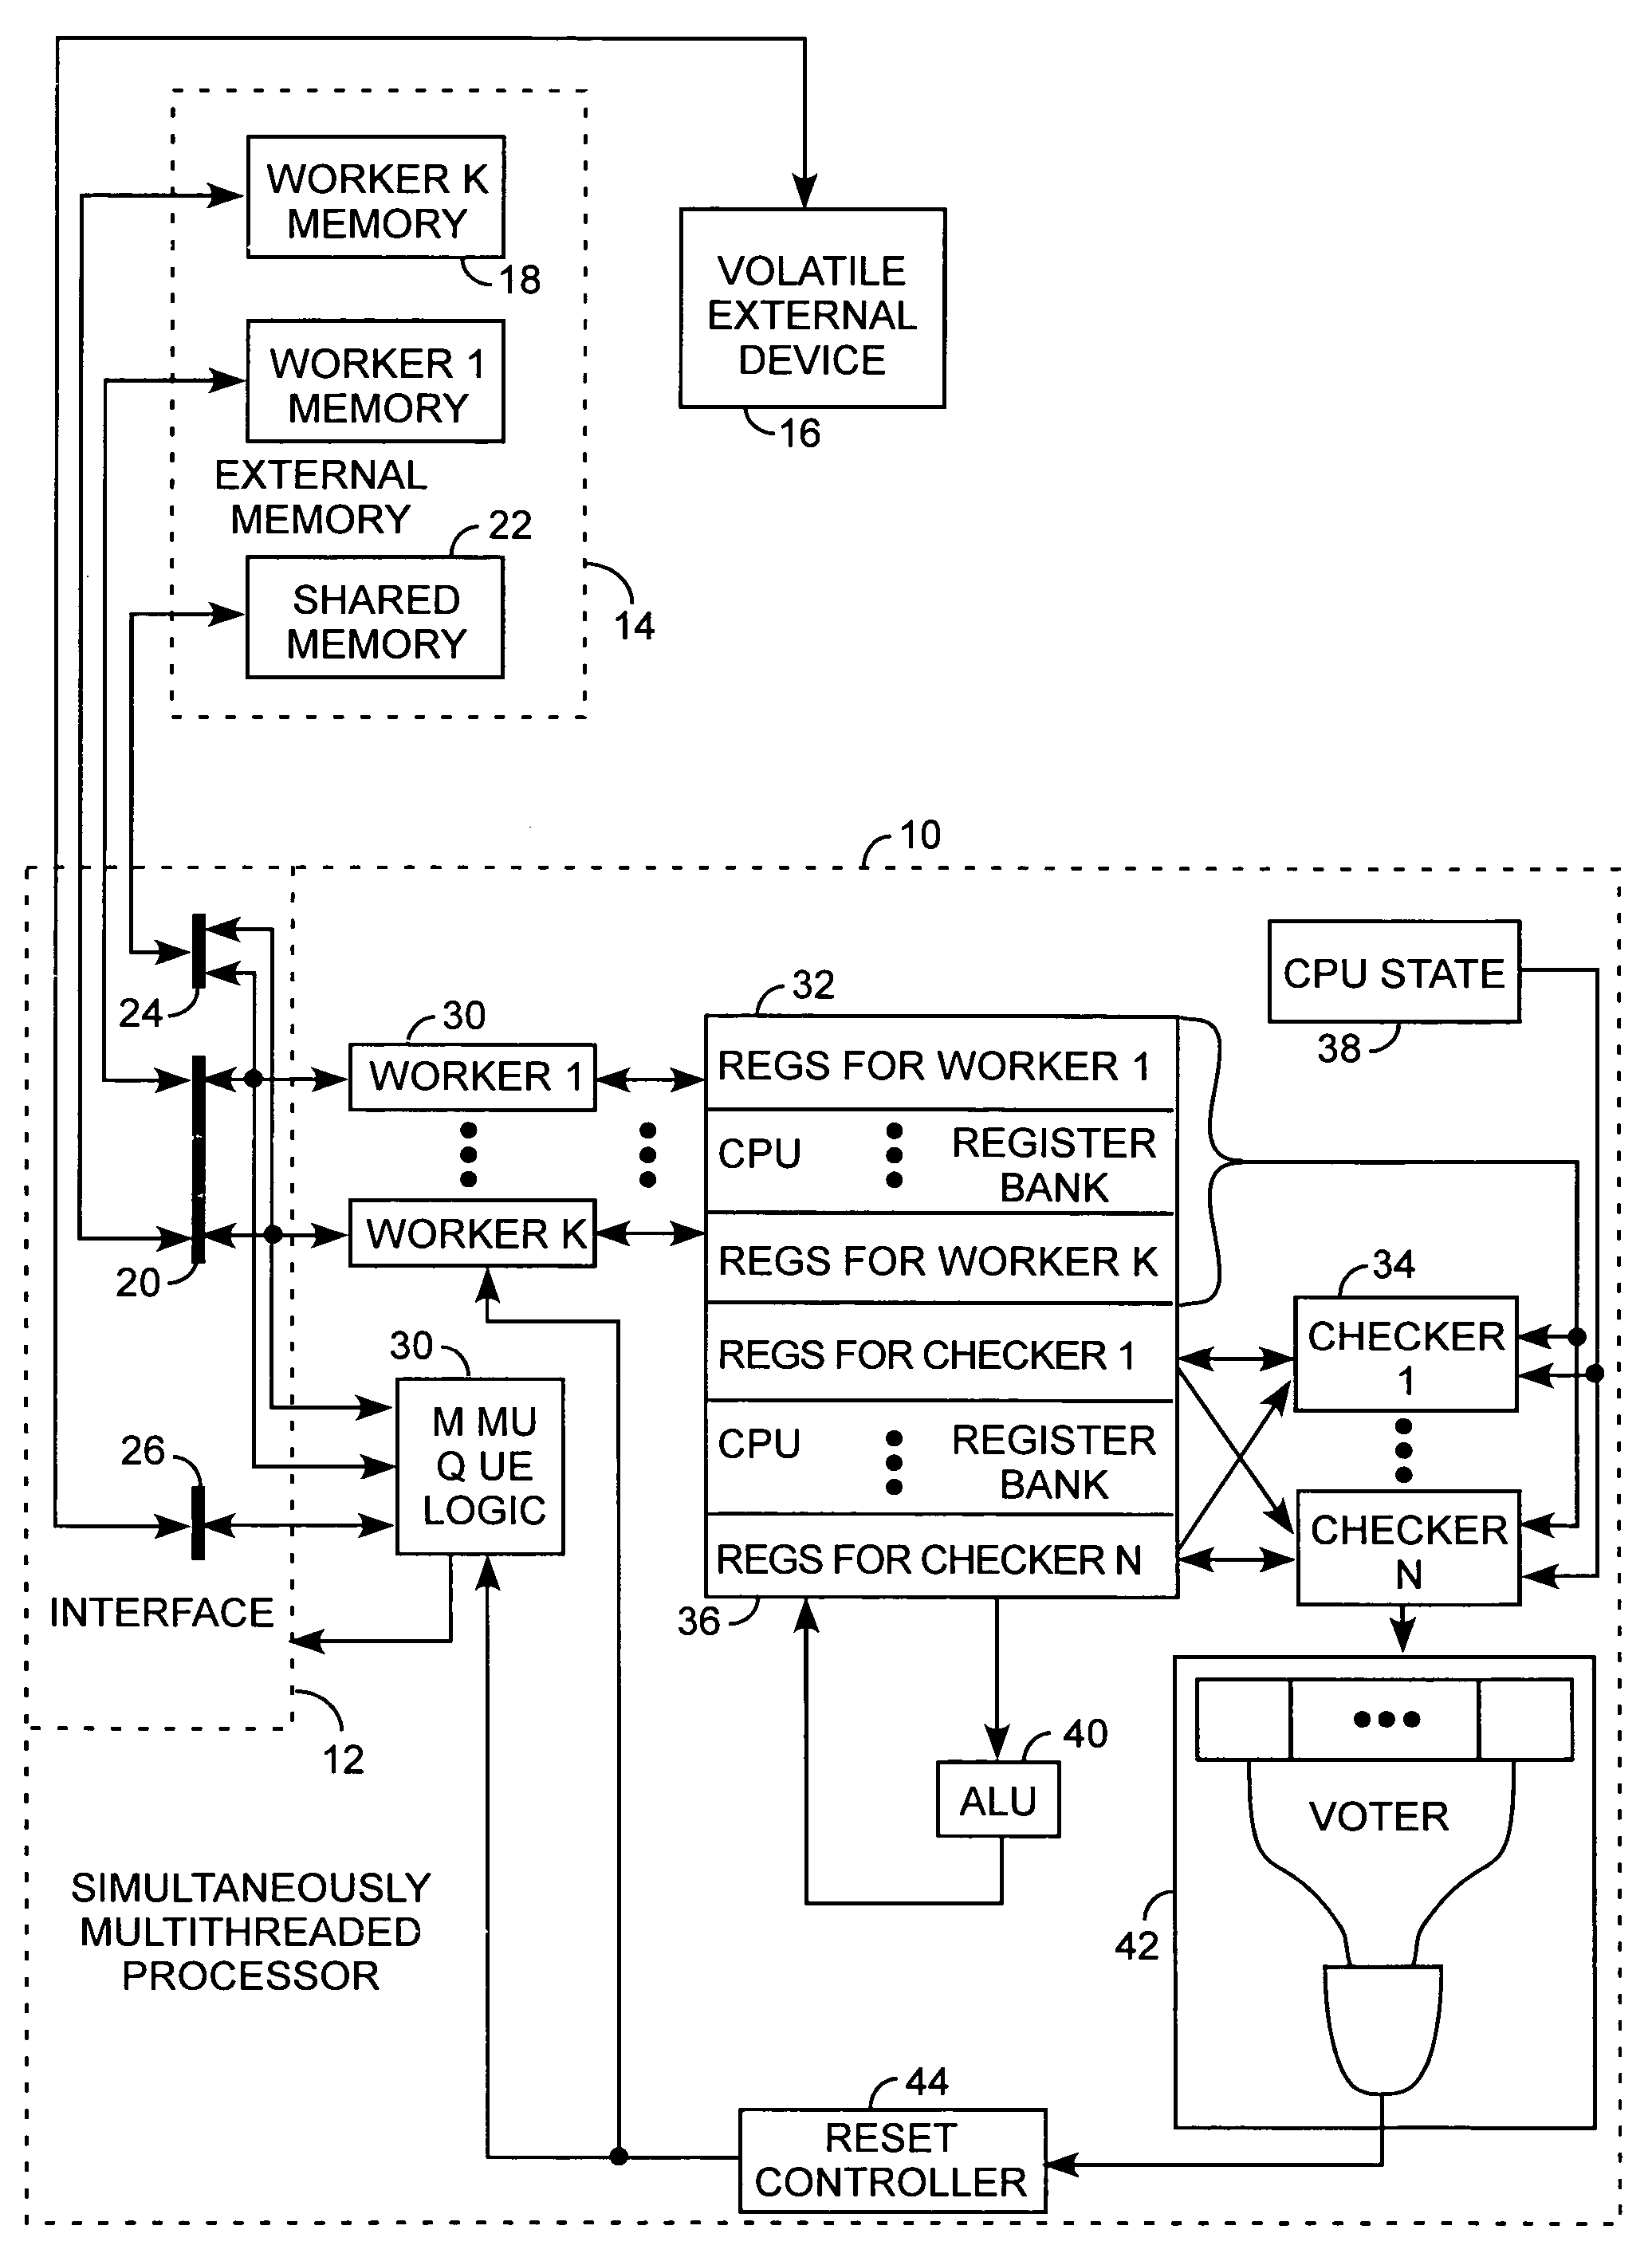 Simultaneously multithreaded processing and single event failure detection method